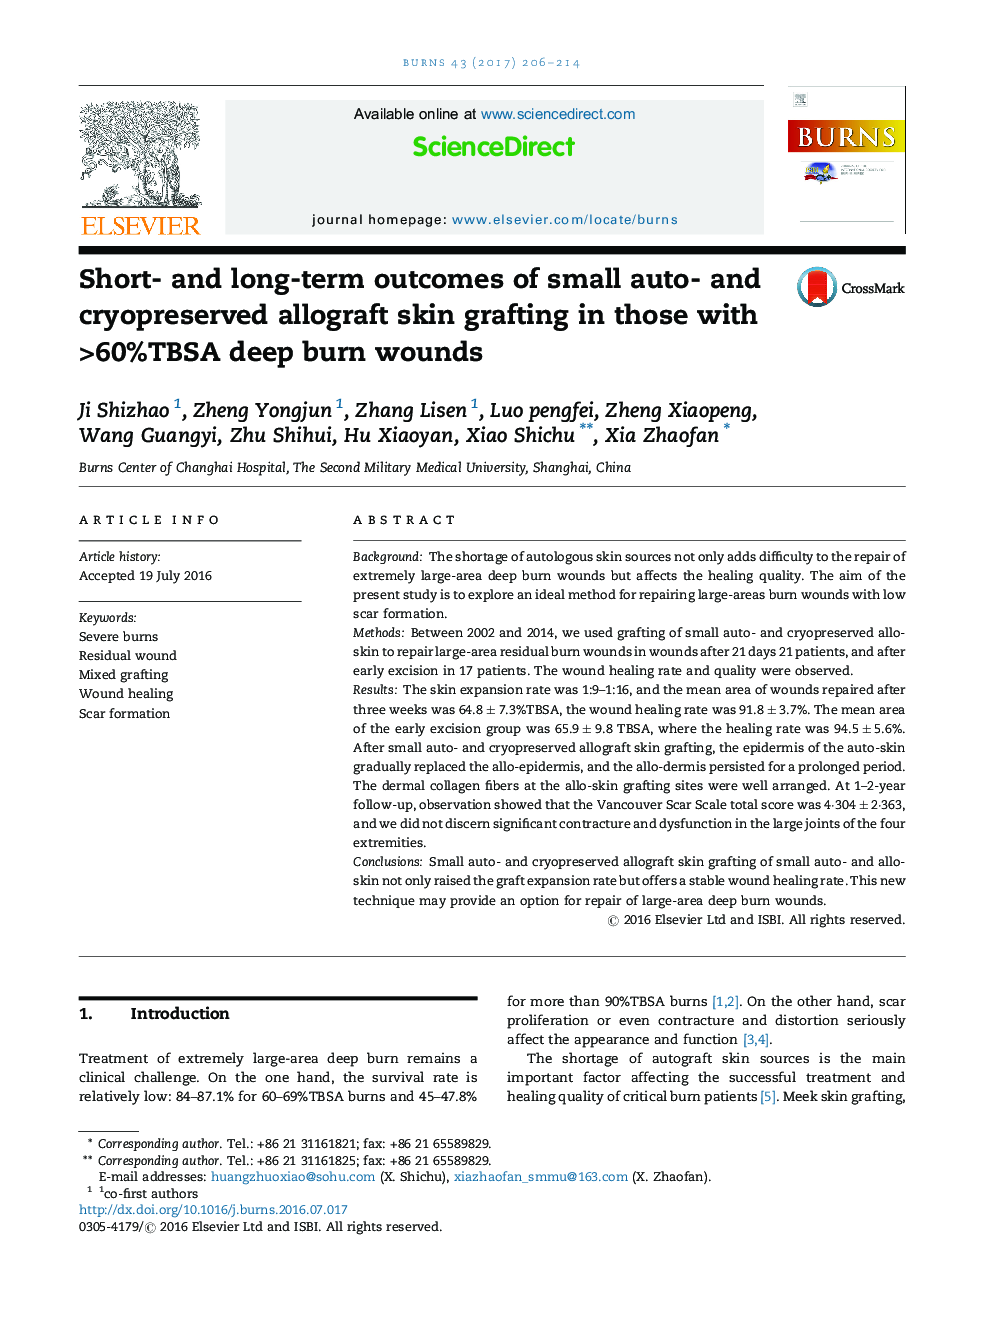 Short- and long-term outcomes of small auto- and cryopreserved allograft skin grafting in those with >60%TBSA deep burn wounds